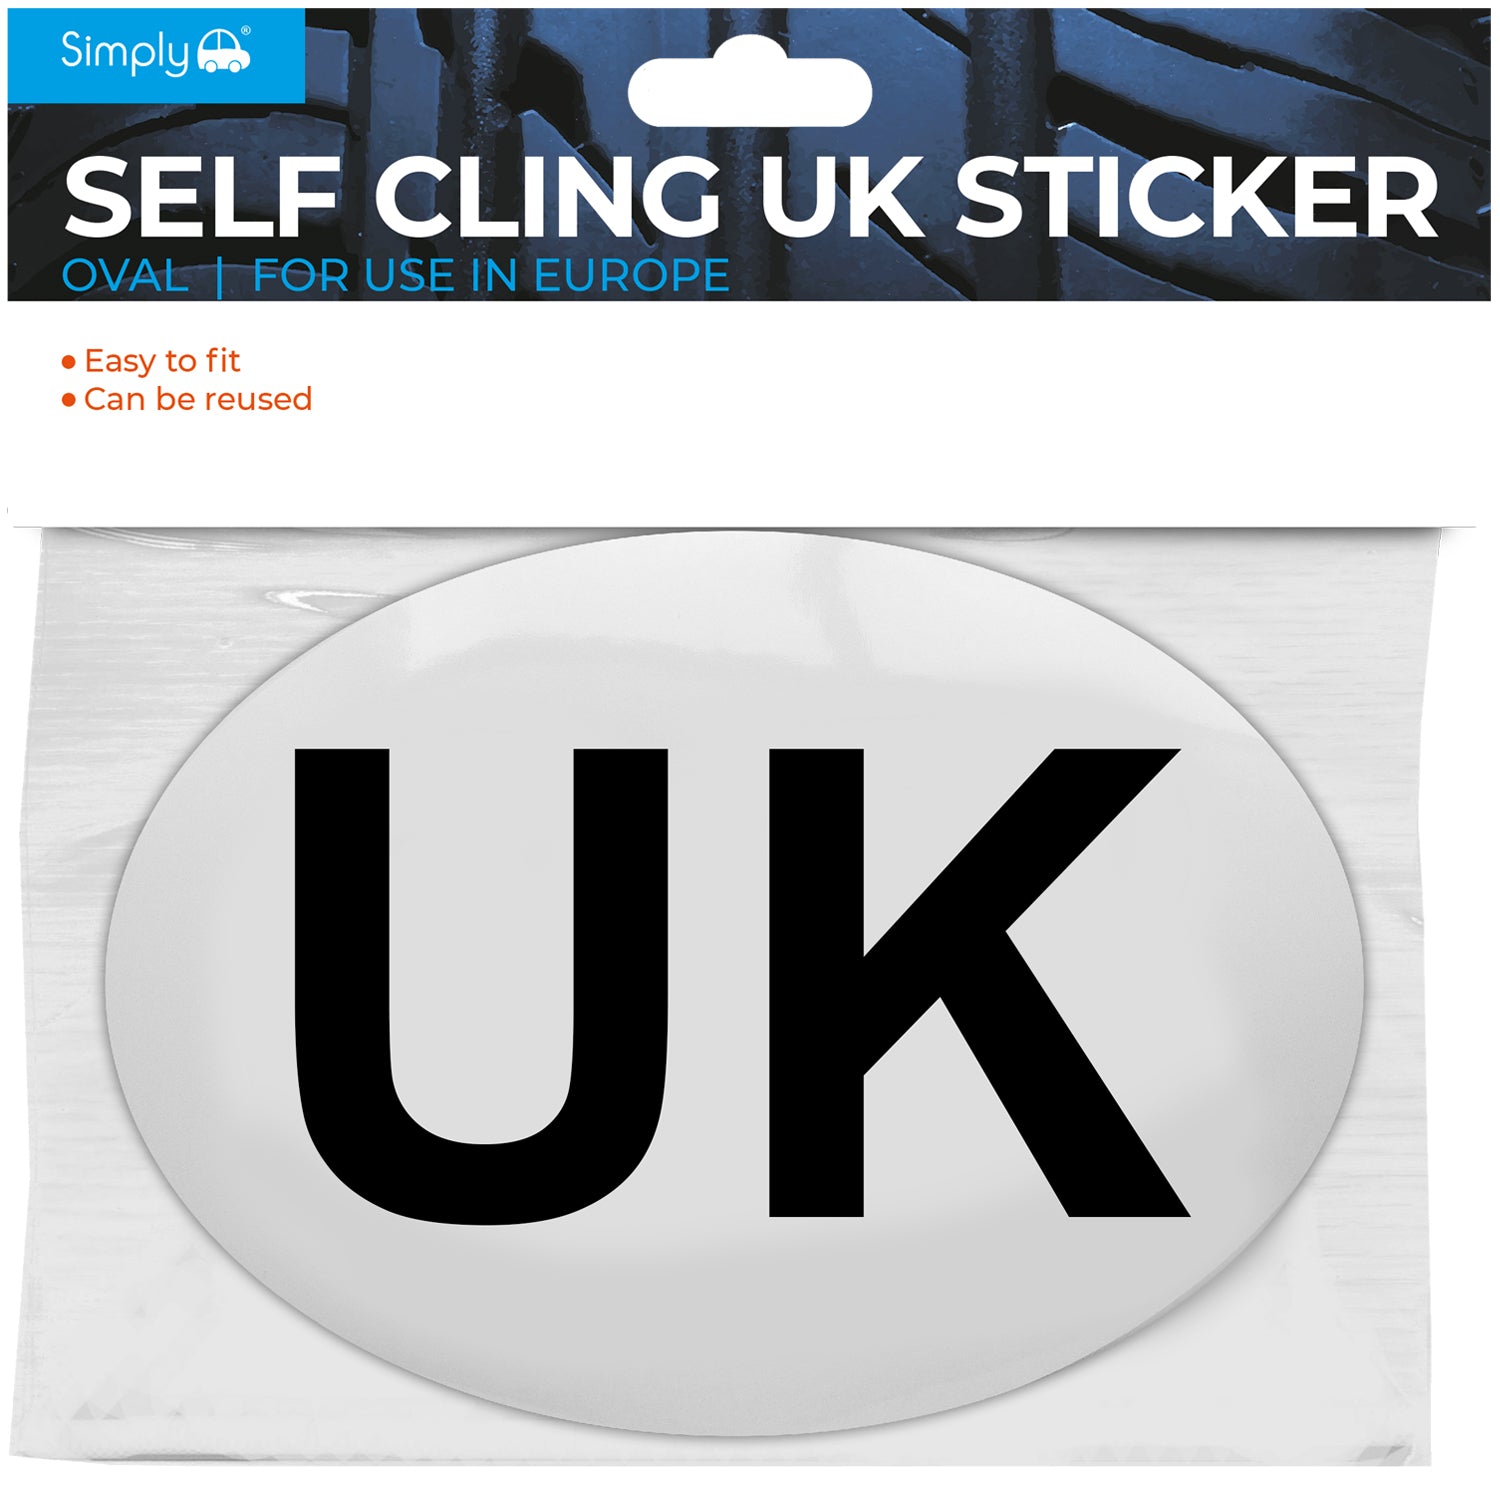 Simply Auto Oval UK Self Cling